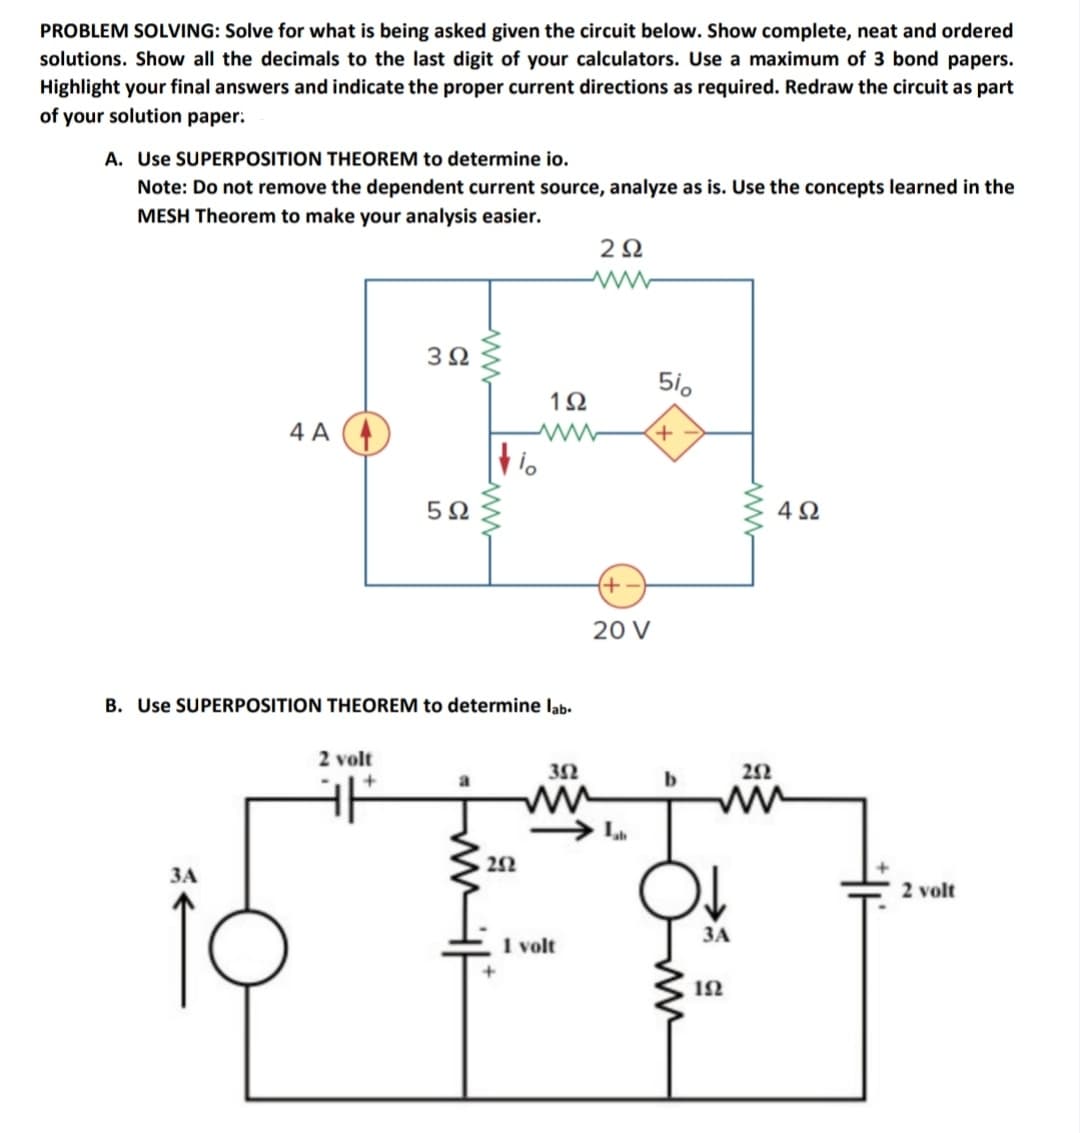 PROBLEM SOLVING: Solve for what is being asked given the circuit below. Show complete, neat and ordered
solutions. Show all the decimals to the last digit of your calculators. Use a maximum of 3 bond papers.
Highlight your final answers and indicate the proper current directions as required. Redraw the circuit as part
of your solution paper.
A. Use SUPERPOSITION THEOREM to determine io.
Note: Do not remove the dependent current source, analyze as is. Use the concepts learned in the
MESH Theorem to make your analysis easier.
3Ω
510
12
4 A
+,
4Ω
(+
20 V
B. Use SUPERPOSITION THEOREM to determine lab-
2 volt
2Ω
ww
252
ЗА
2 volt
ЗА
1 volt
1N
